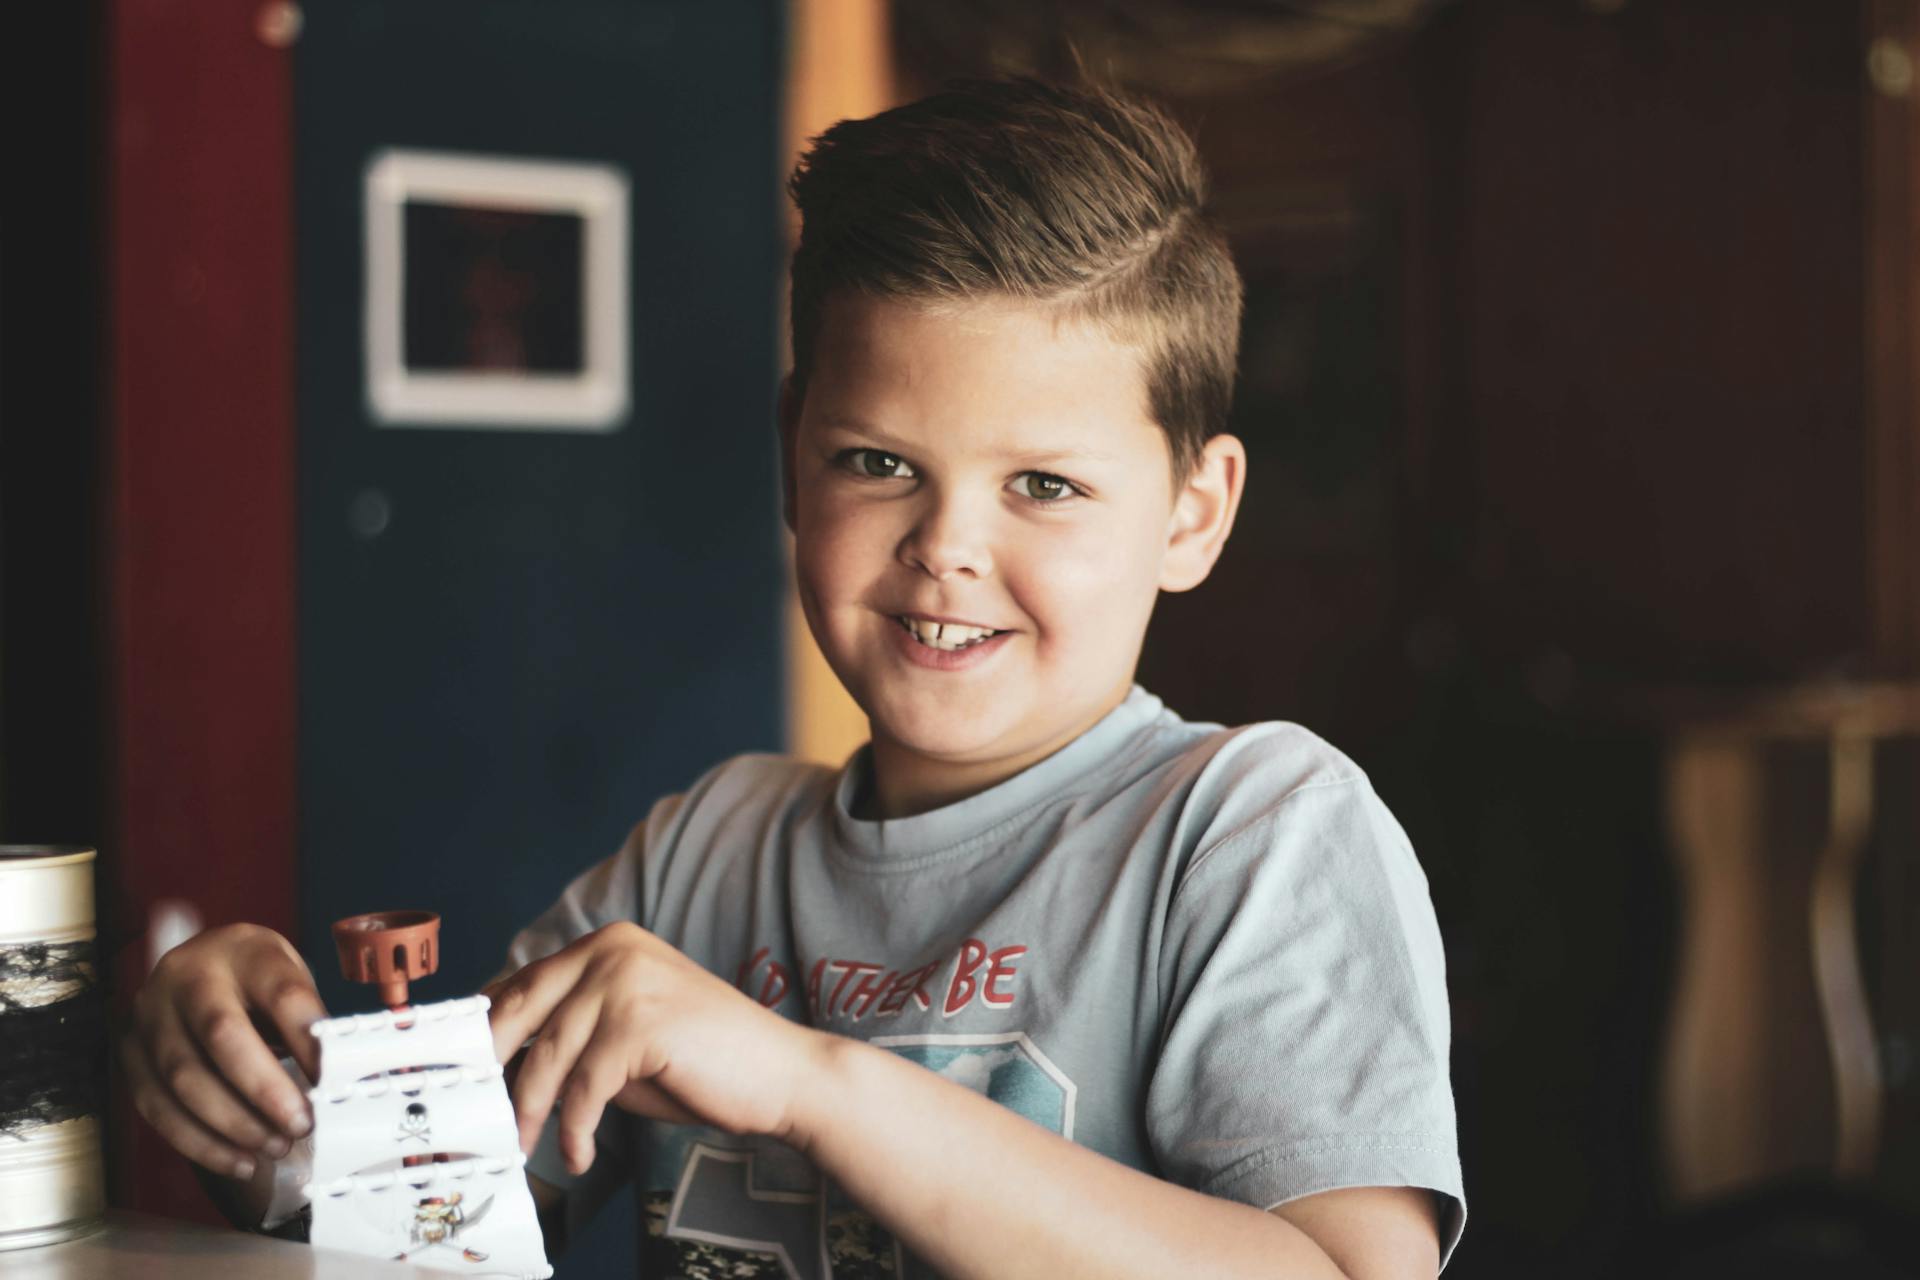 A smiling boy holding a toy | Source: Pexels